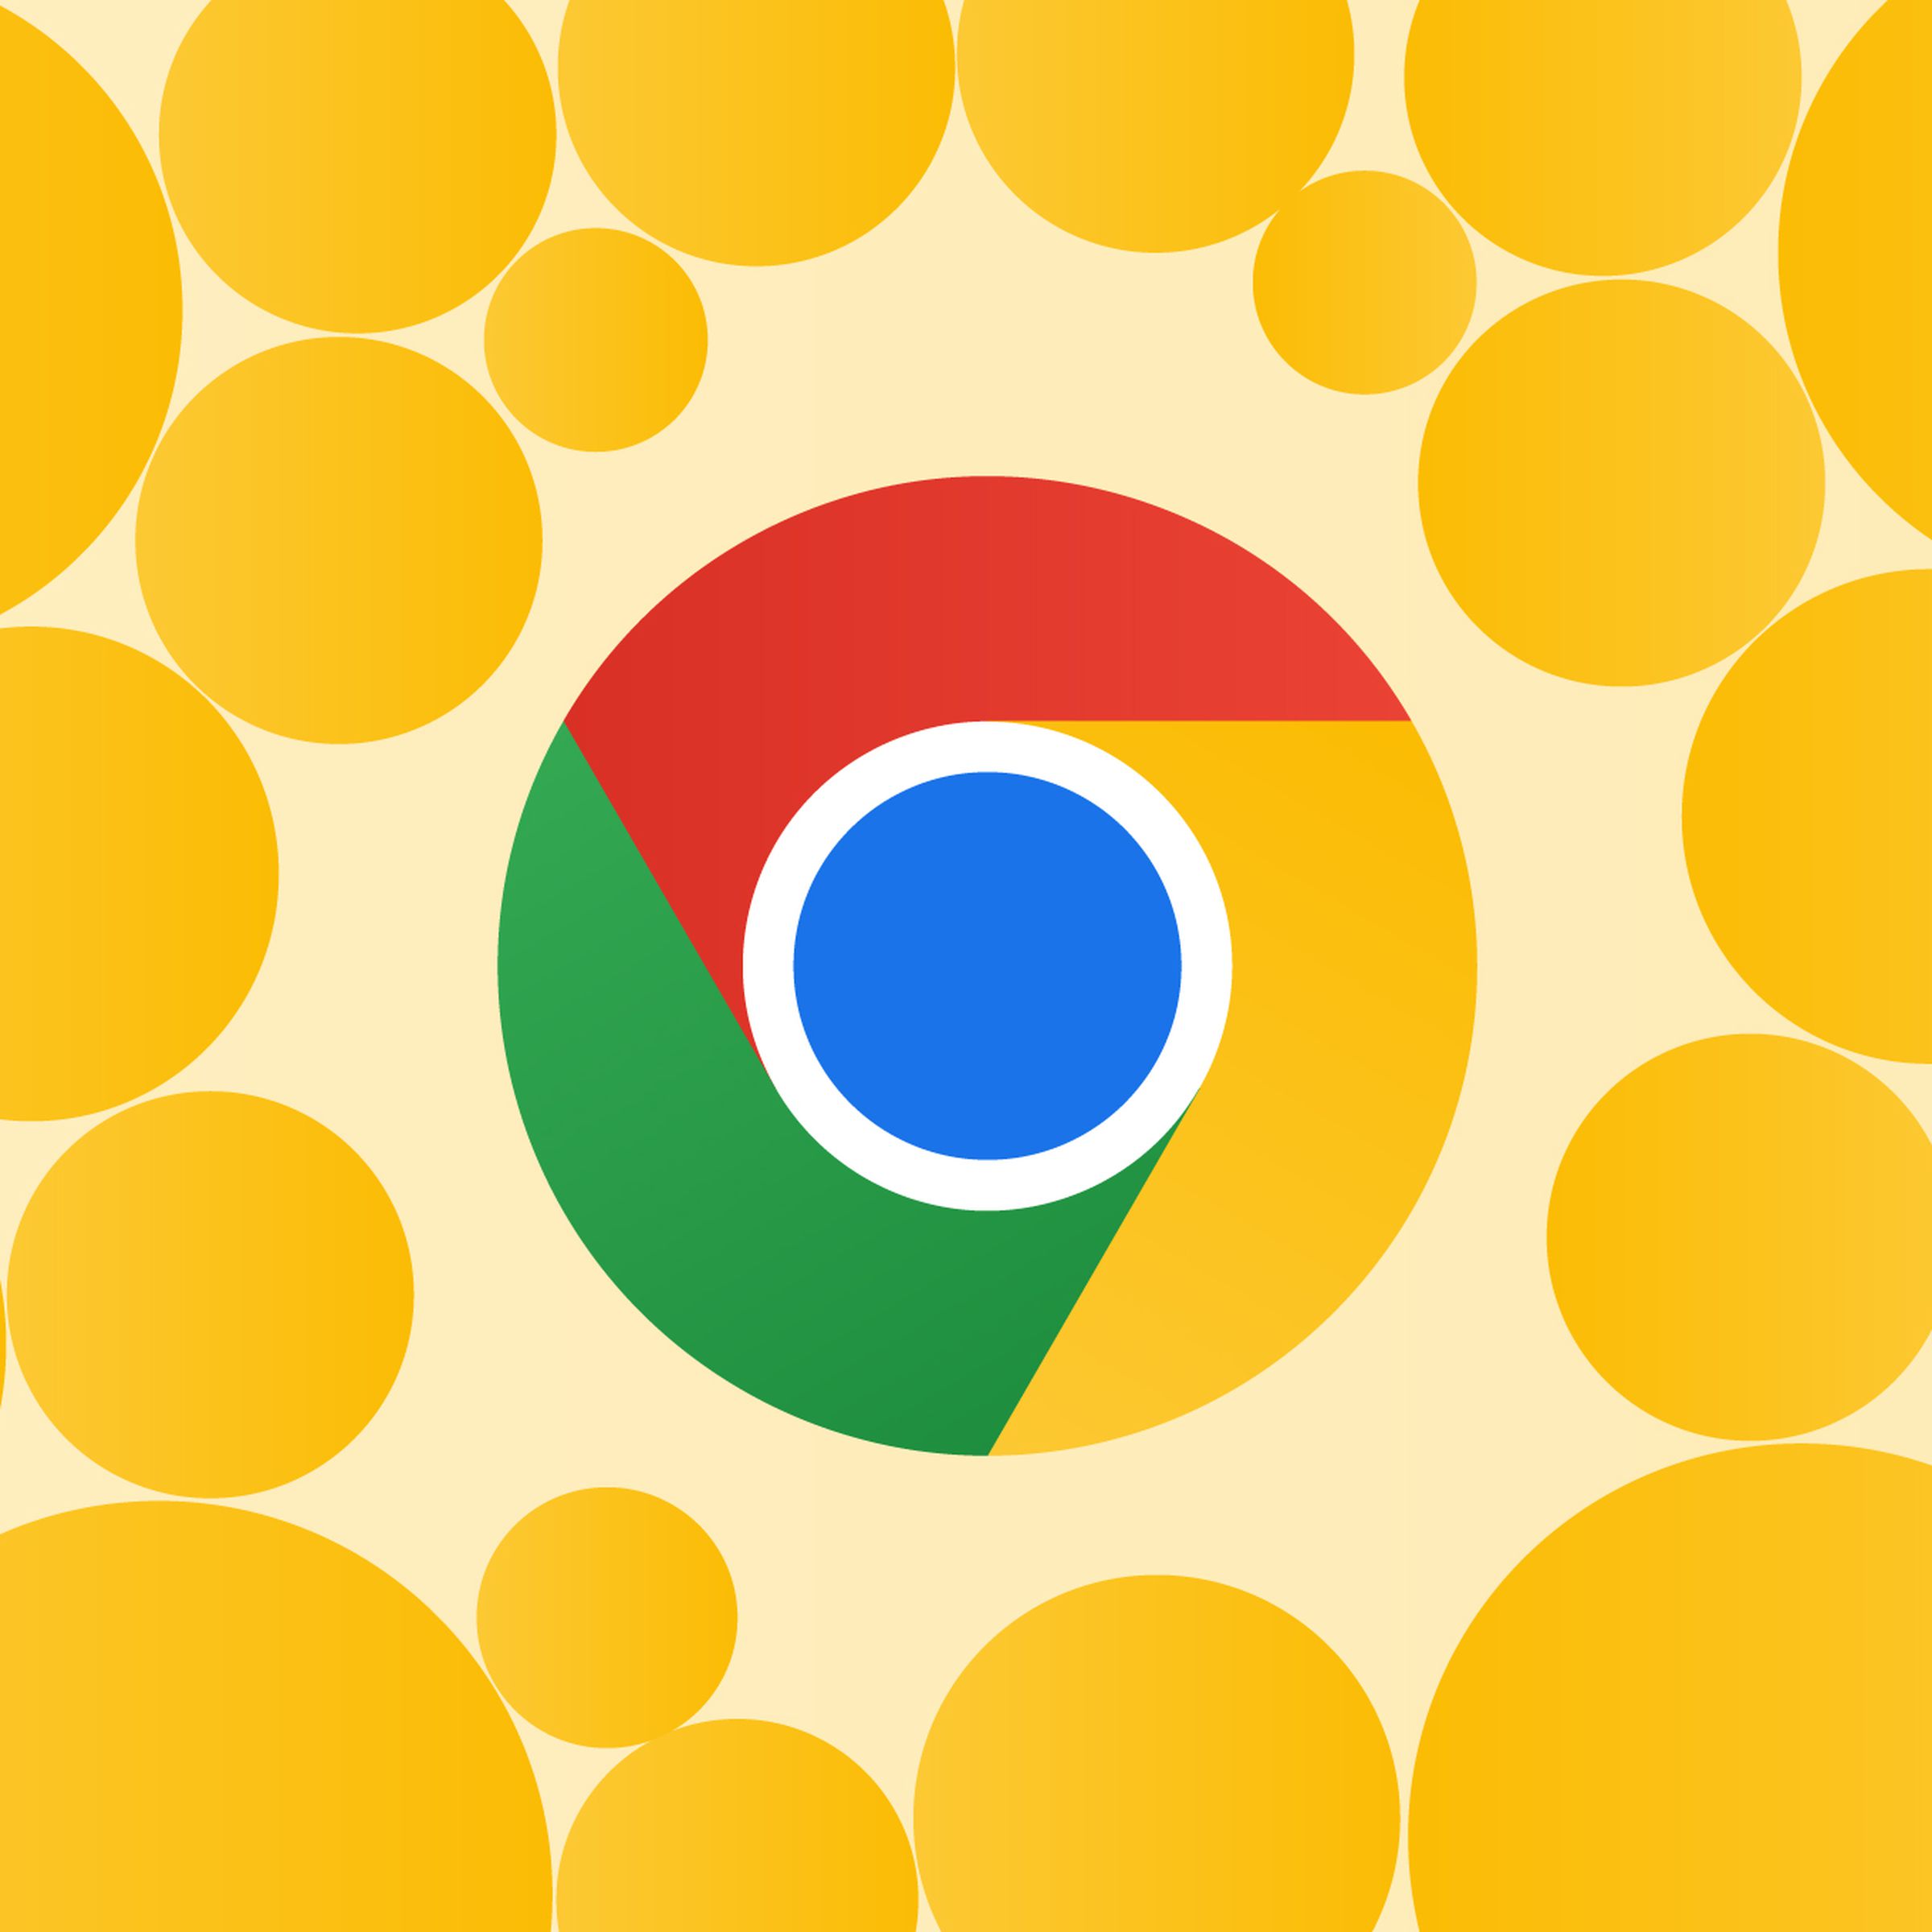 An image showing the Chrome logo surrounded by yellow circles